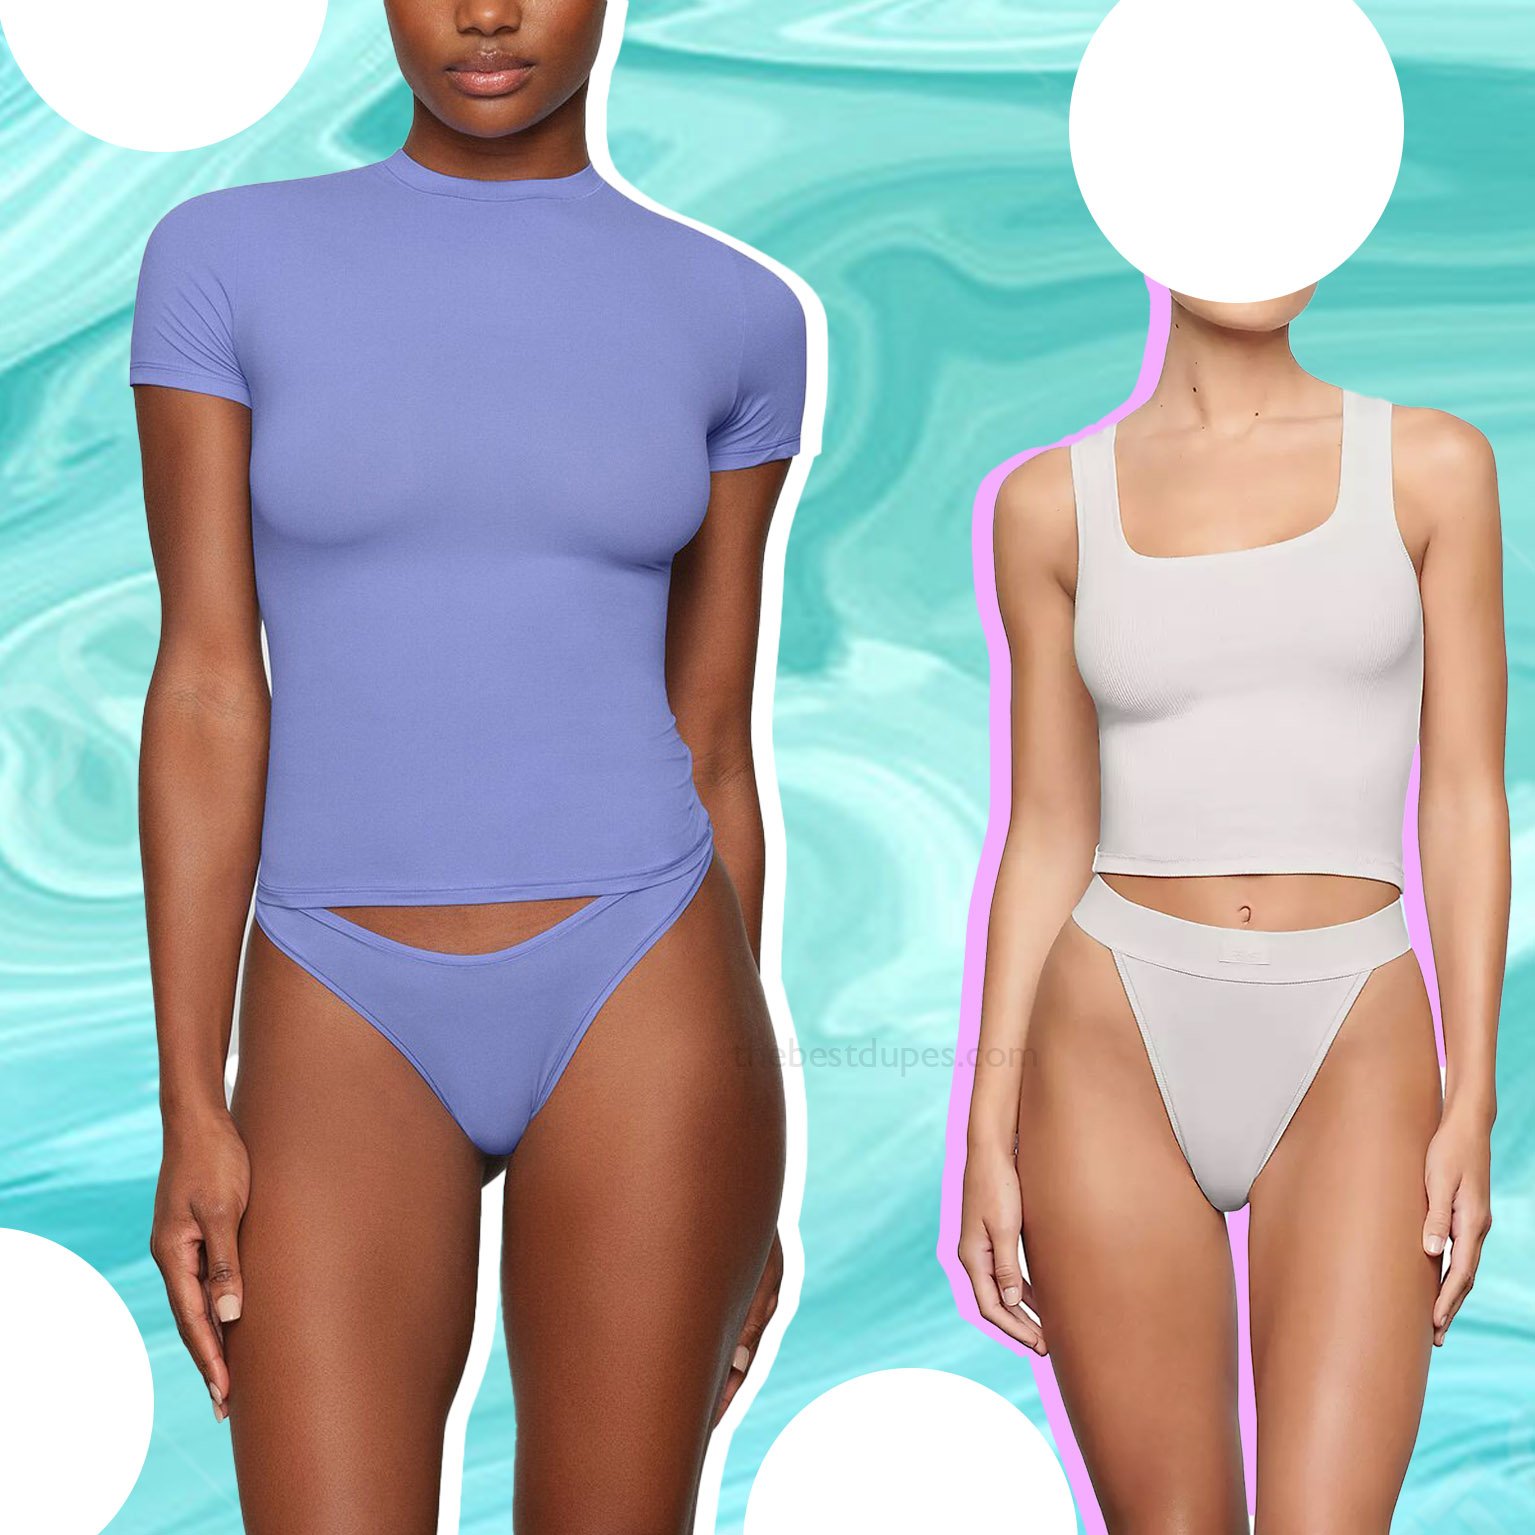 The Best Skims Tank Top Dupes From $4 - TheBestDupes